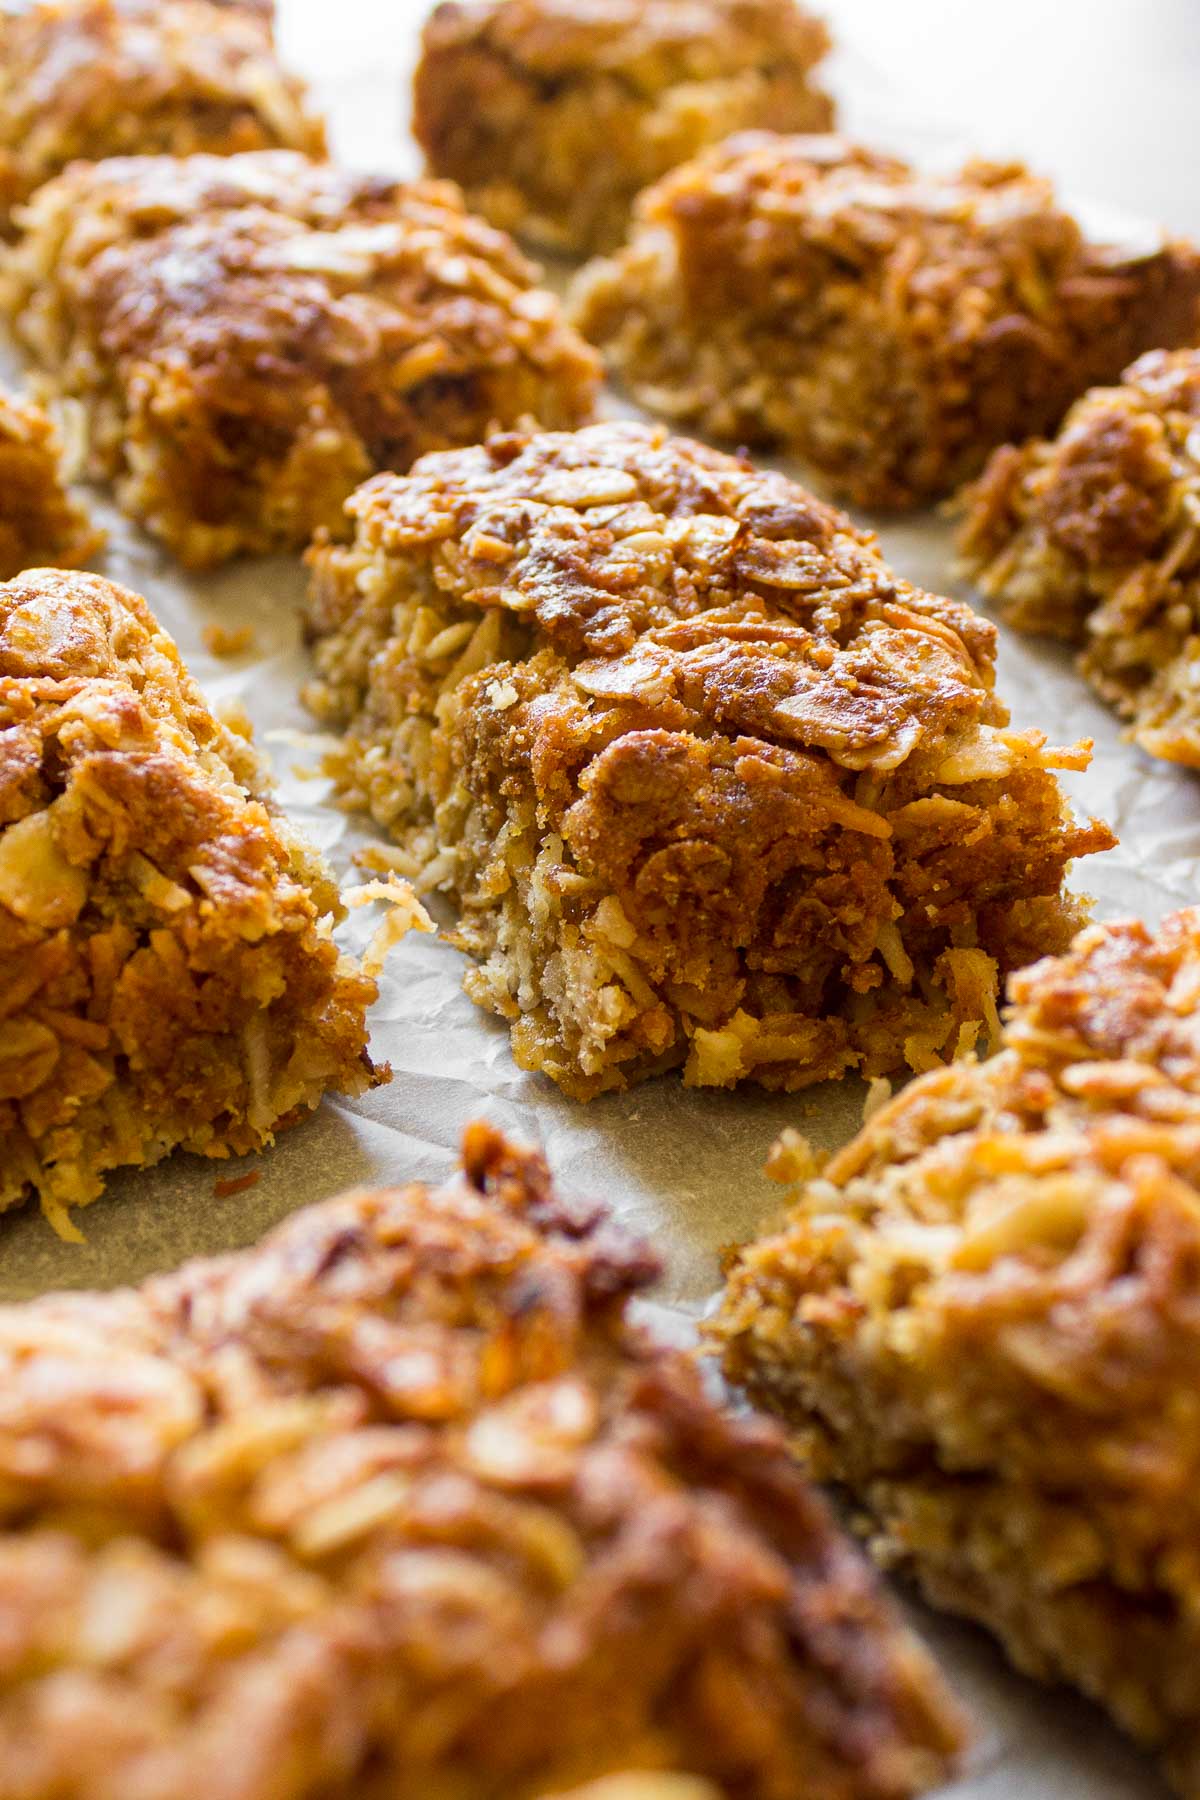 Close up of a crunchie showing oats and coconut in the biscuit.